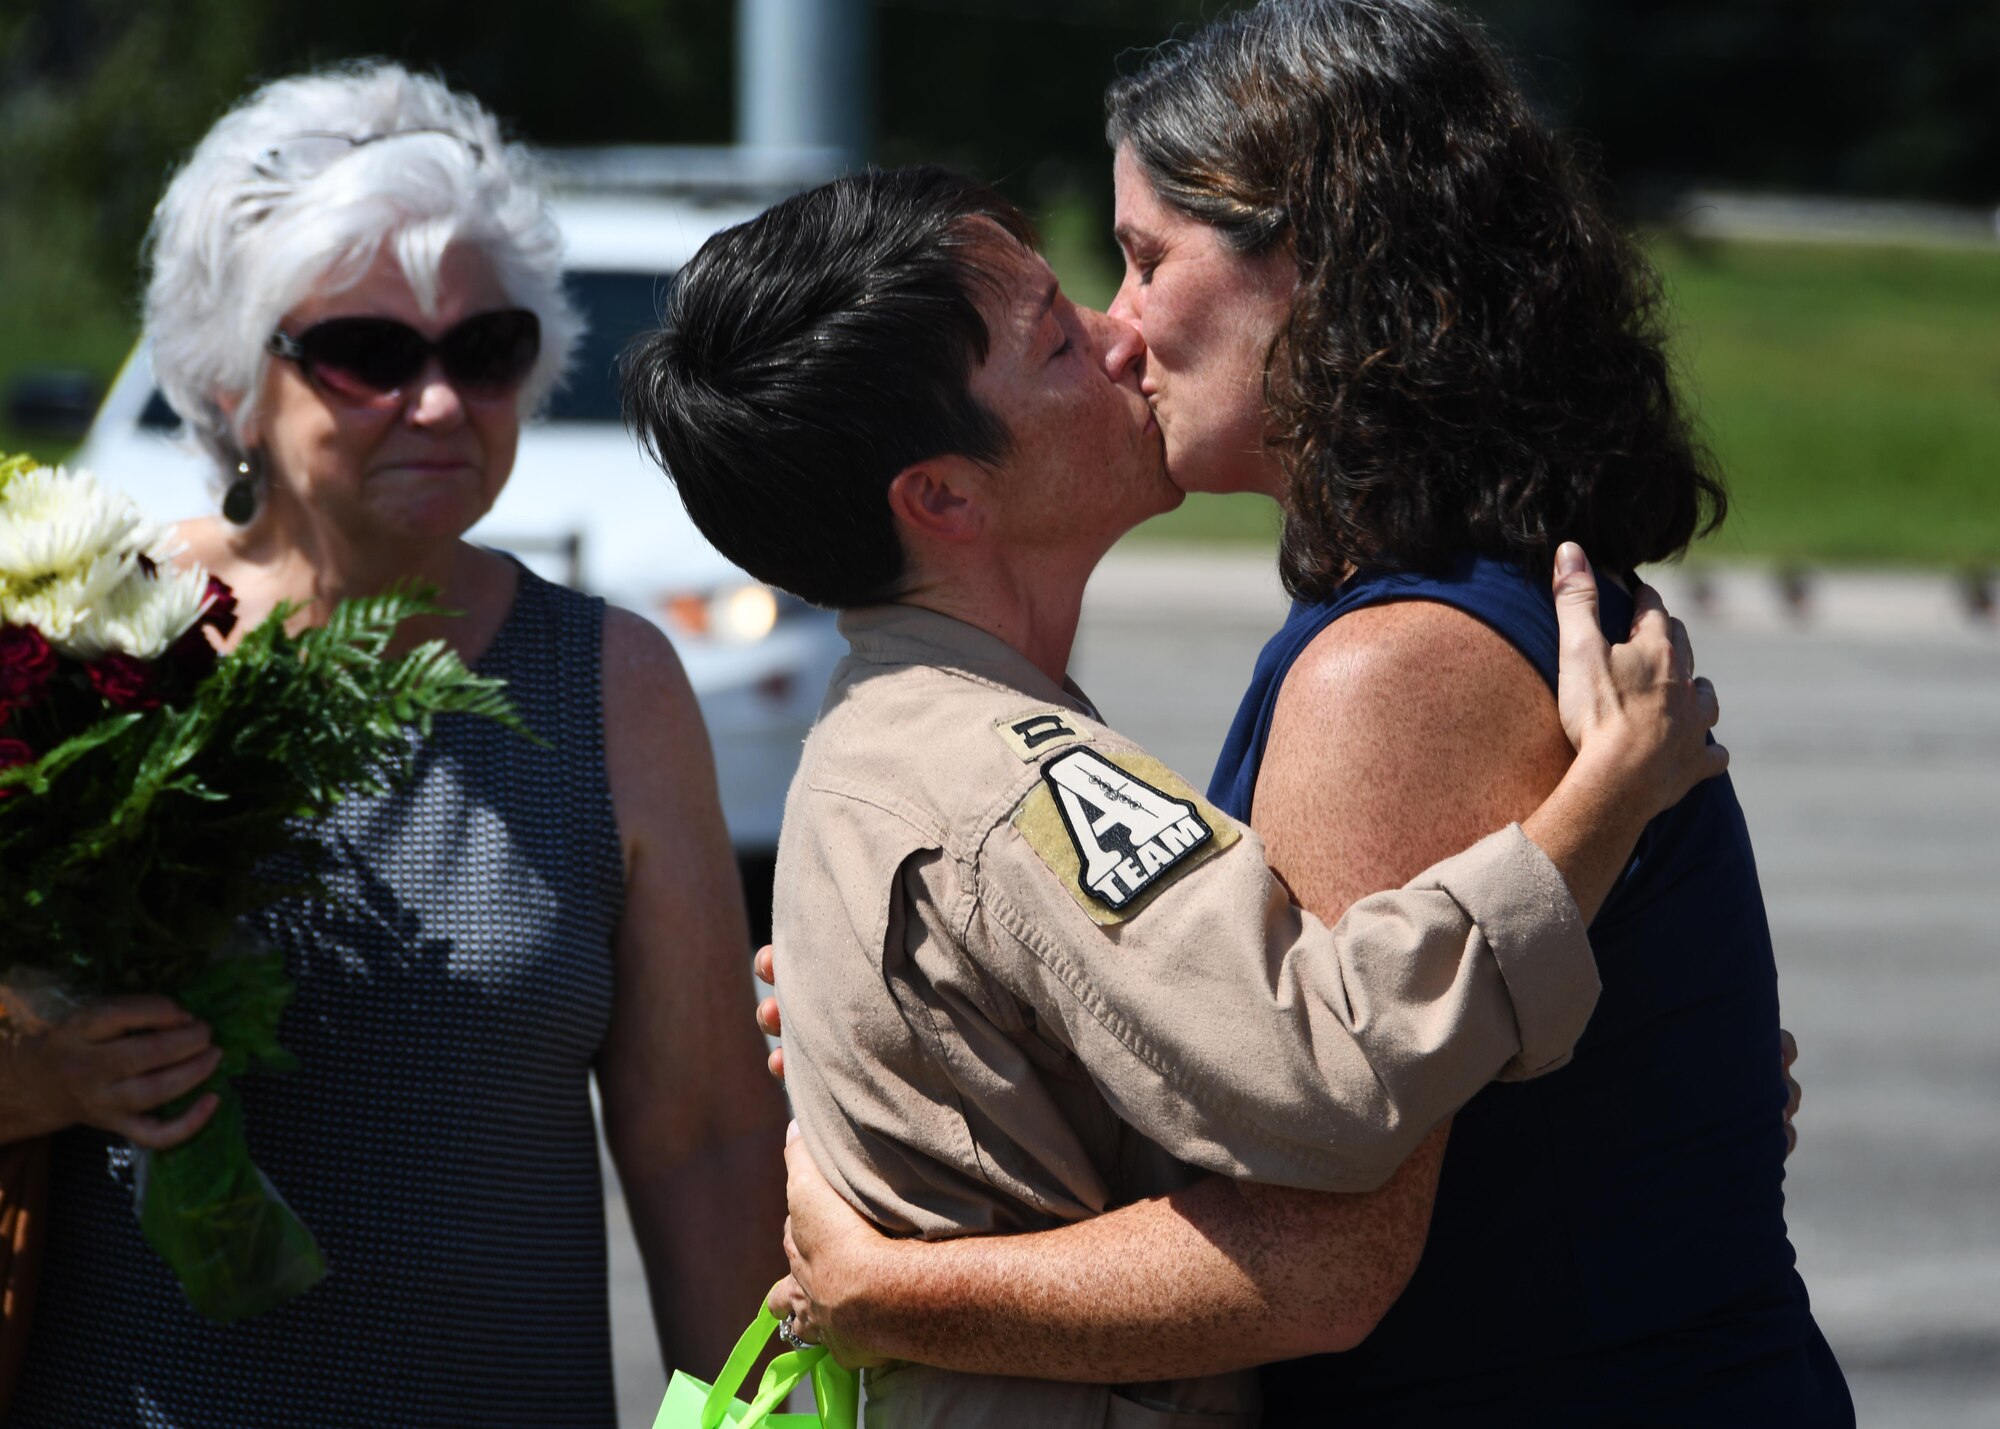 Capt. Rendi Clegg, 700th Airlift Squadron navigator, kisses her wife at Dobbins Air Reserve Base, September 18, 2017. Glegg returned to Dobbins after a four month deployment to Al Udeid Air Base, and found wife waiting for her, along with the friends and family of the other Deployers who arrived with Clegg. (U.S. Air Force Photo by Staff Sergeant Miles Wilson)